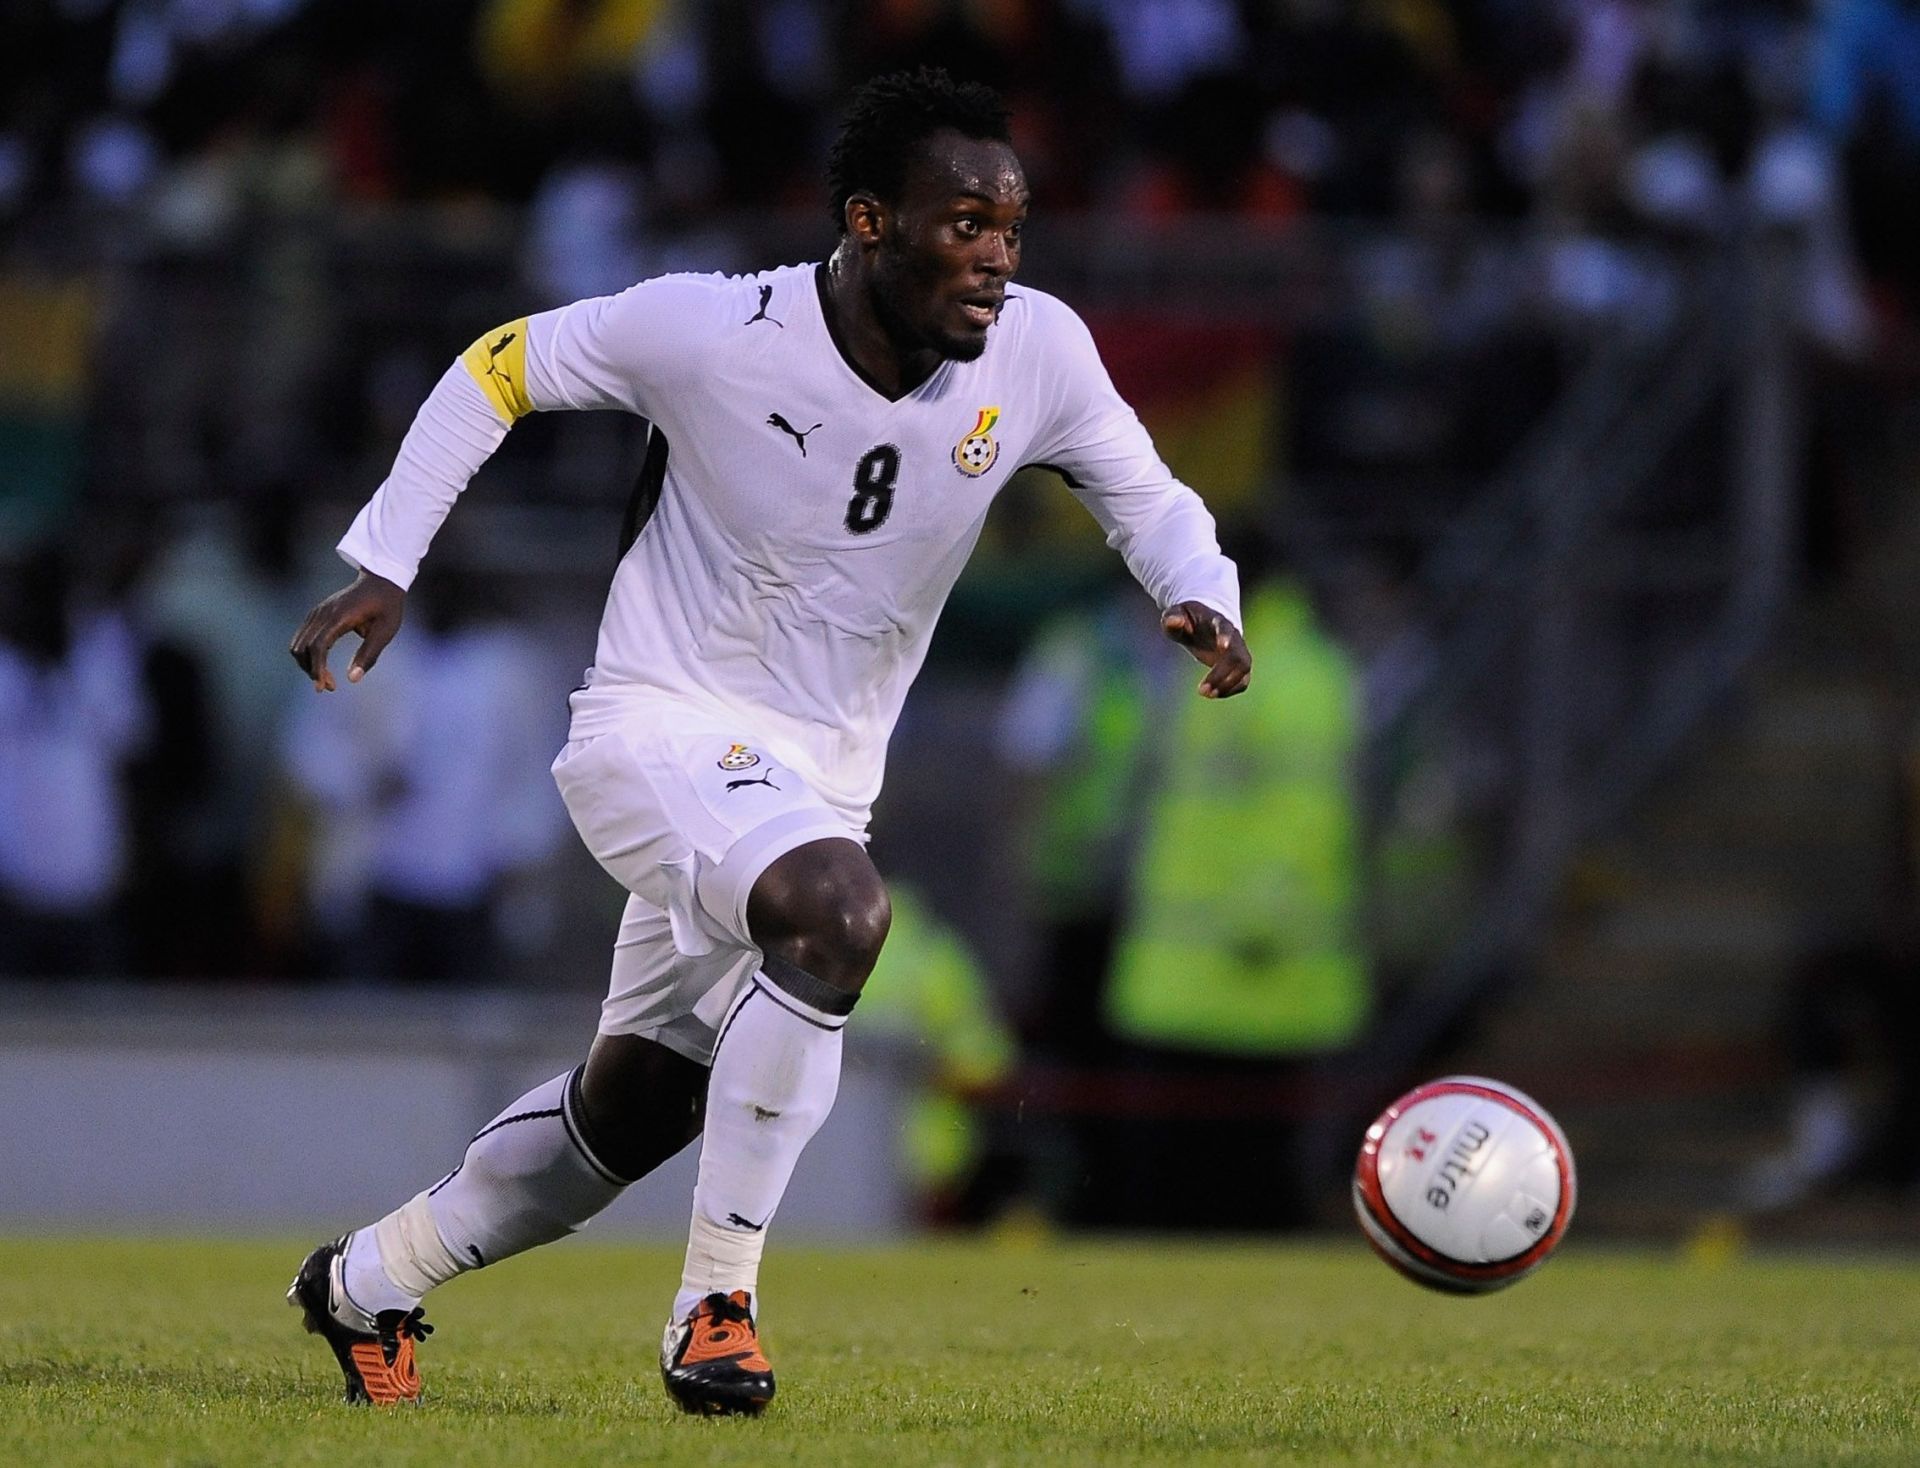 Essien never won the CAF African Player of the Year award despite several nominations